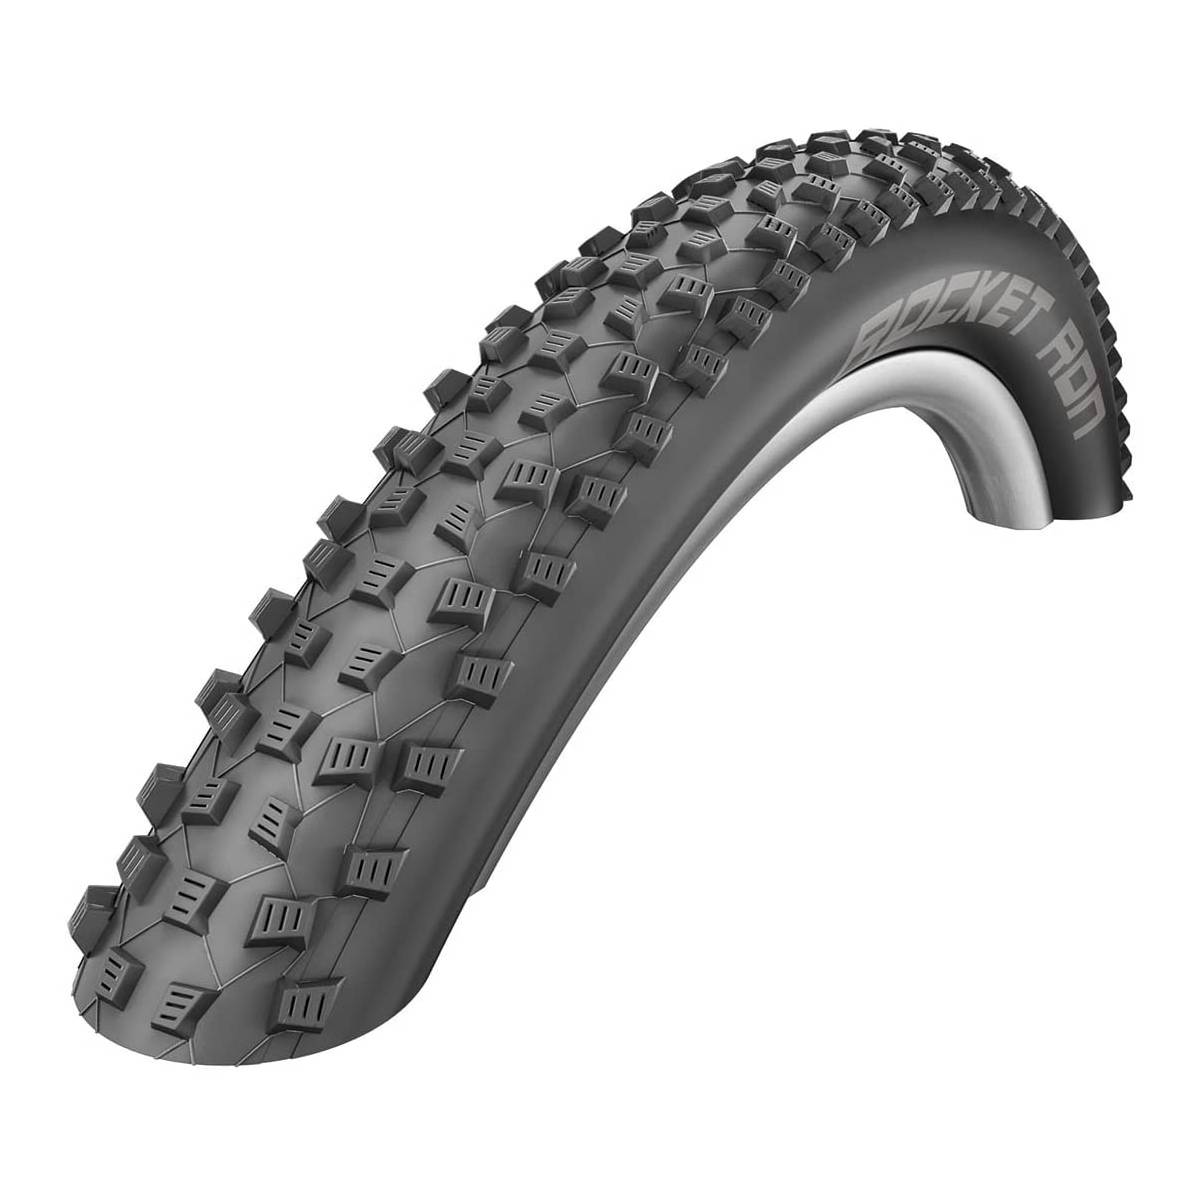 SCHWALBE, ROCKET RON, 29X2.25, FOLDABLE, PACESTAR, PACESTAR, TUBELESS READY, 67TPI, 26-54PSI, 605, BLACK